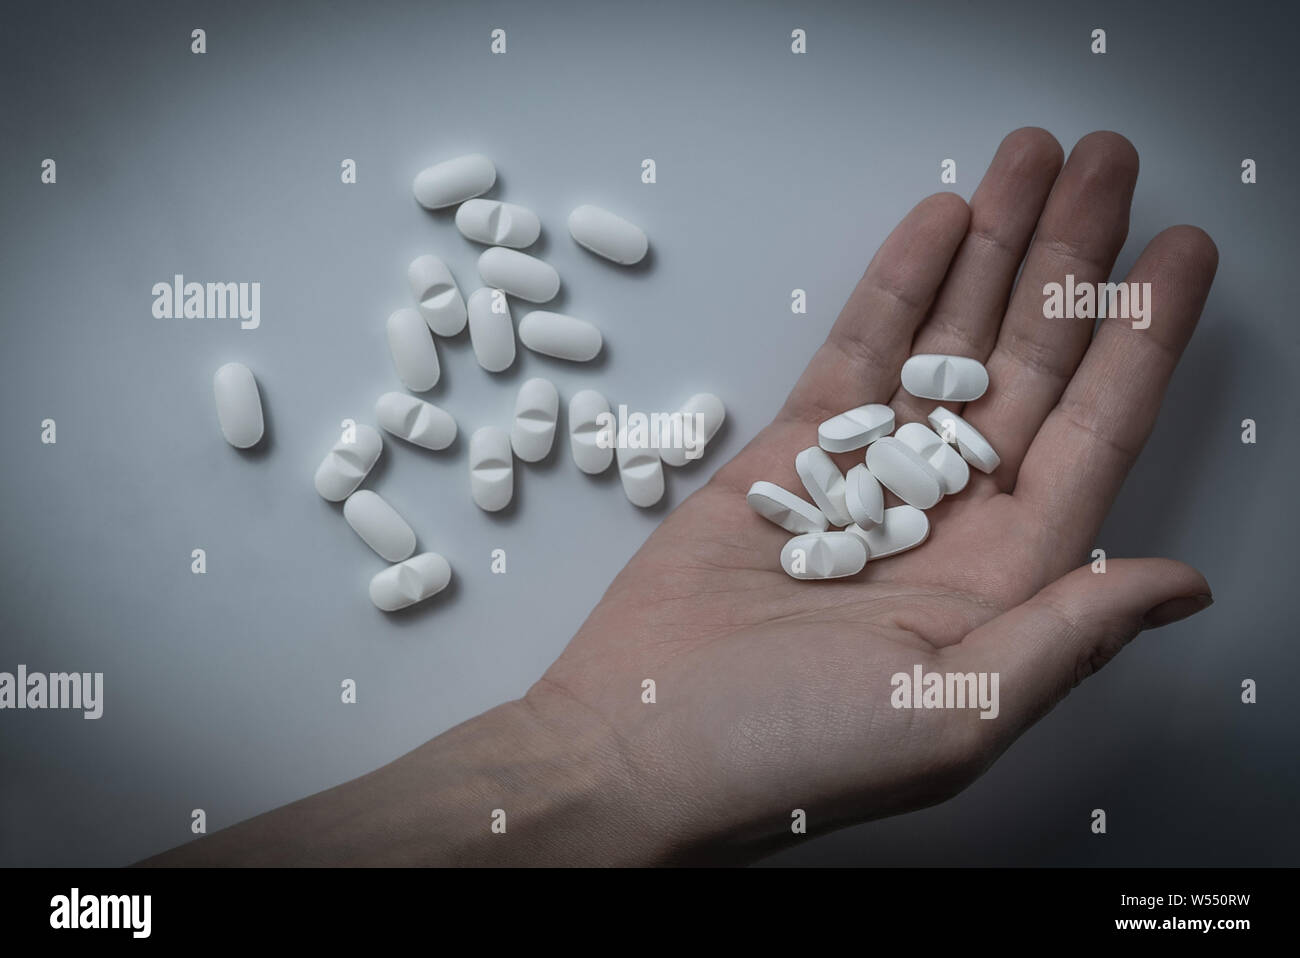 Hand holding many white prescription drugs, medicine tablets or vitamin pills in a pile - Concept of healthcare, opioids addiction, medicament abuse Stock Photo